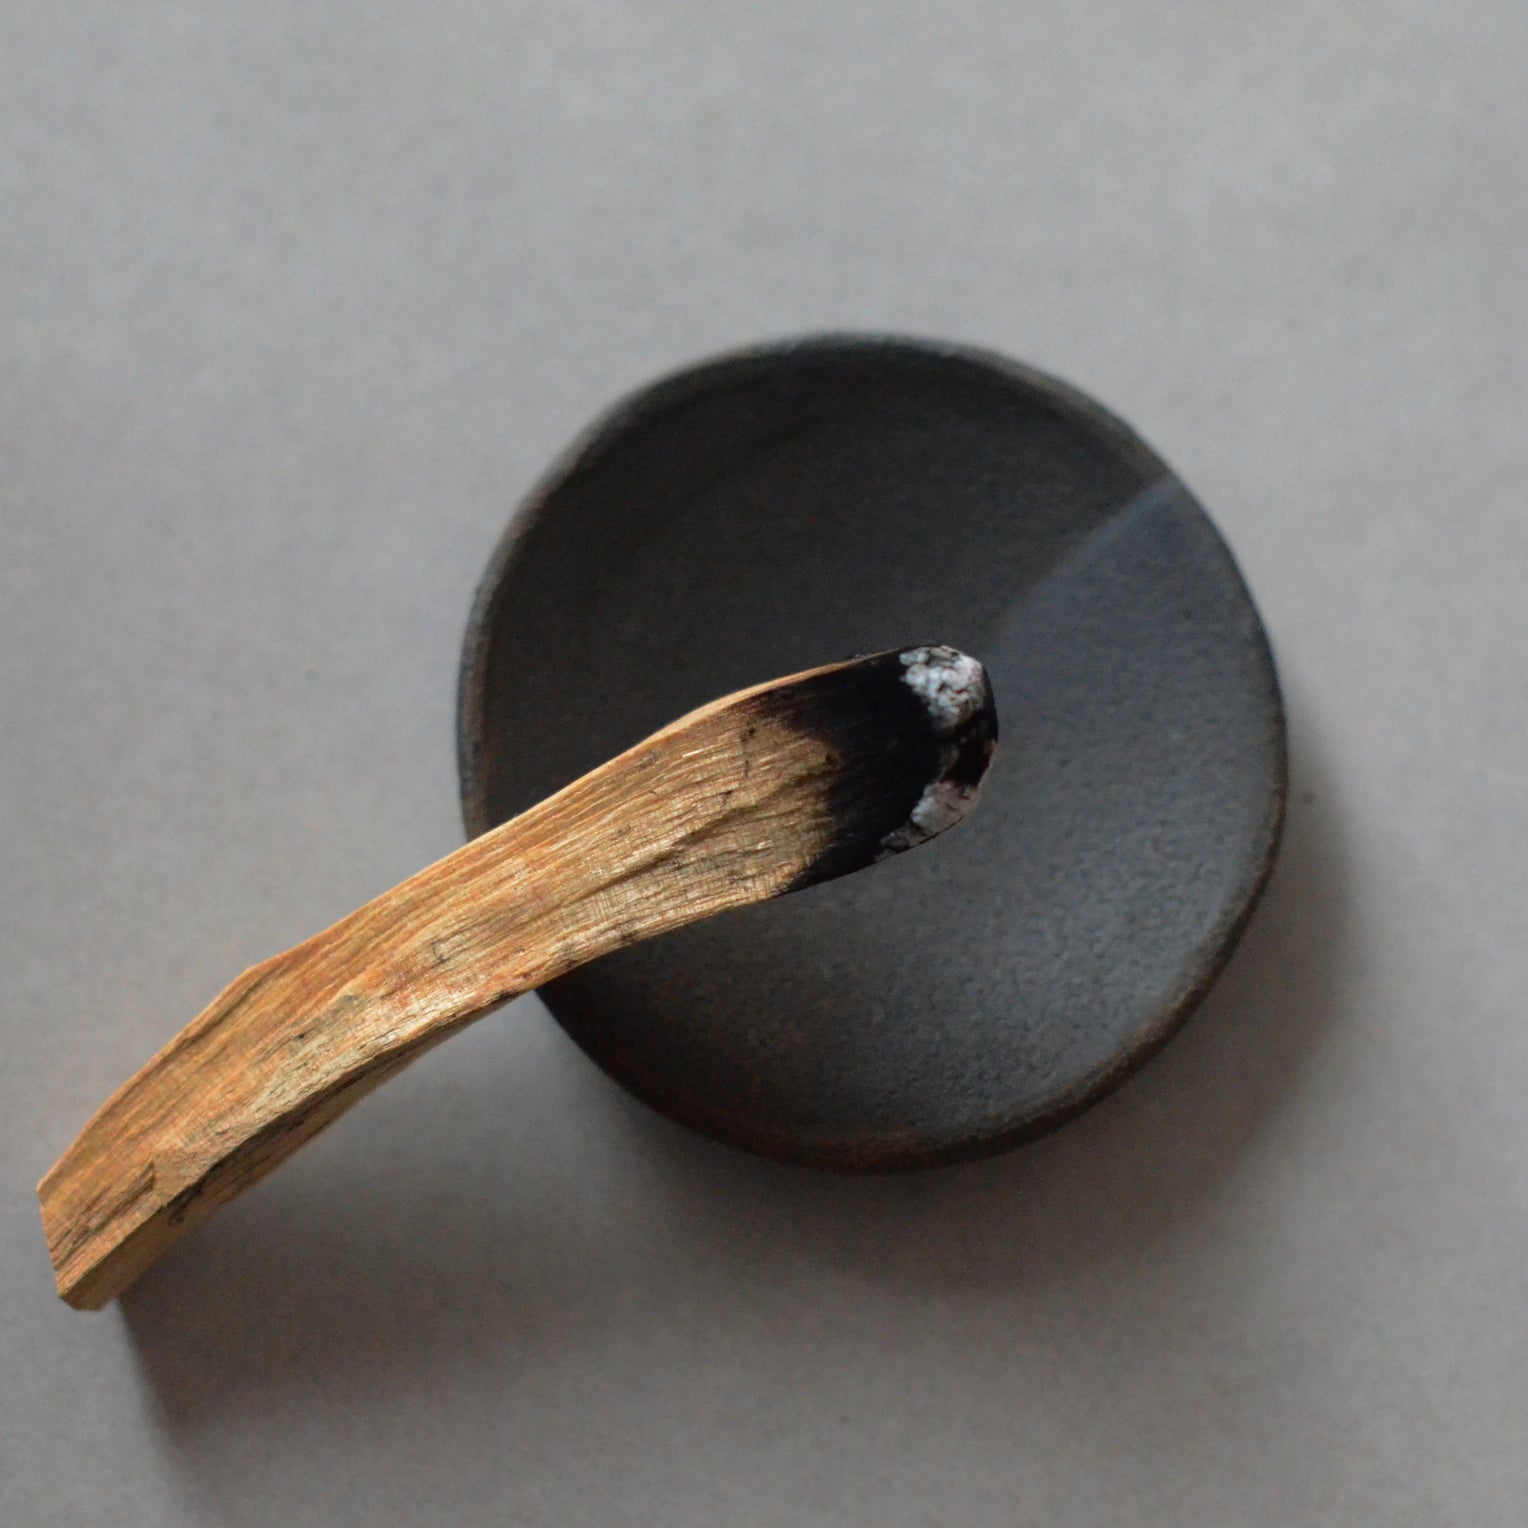 Black Raw Clay Incense Plate